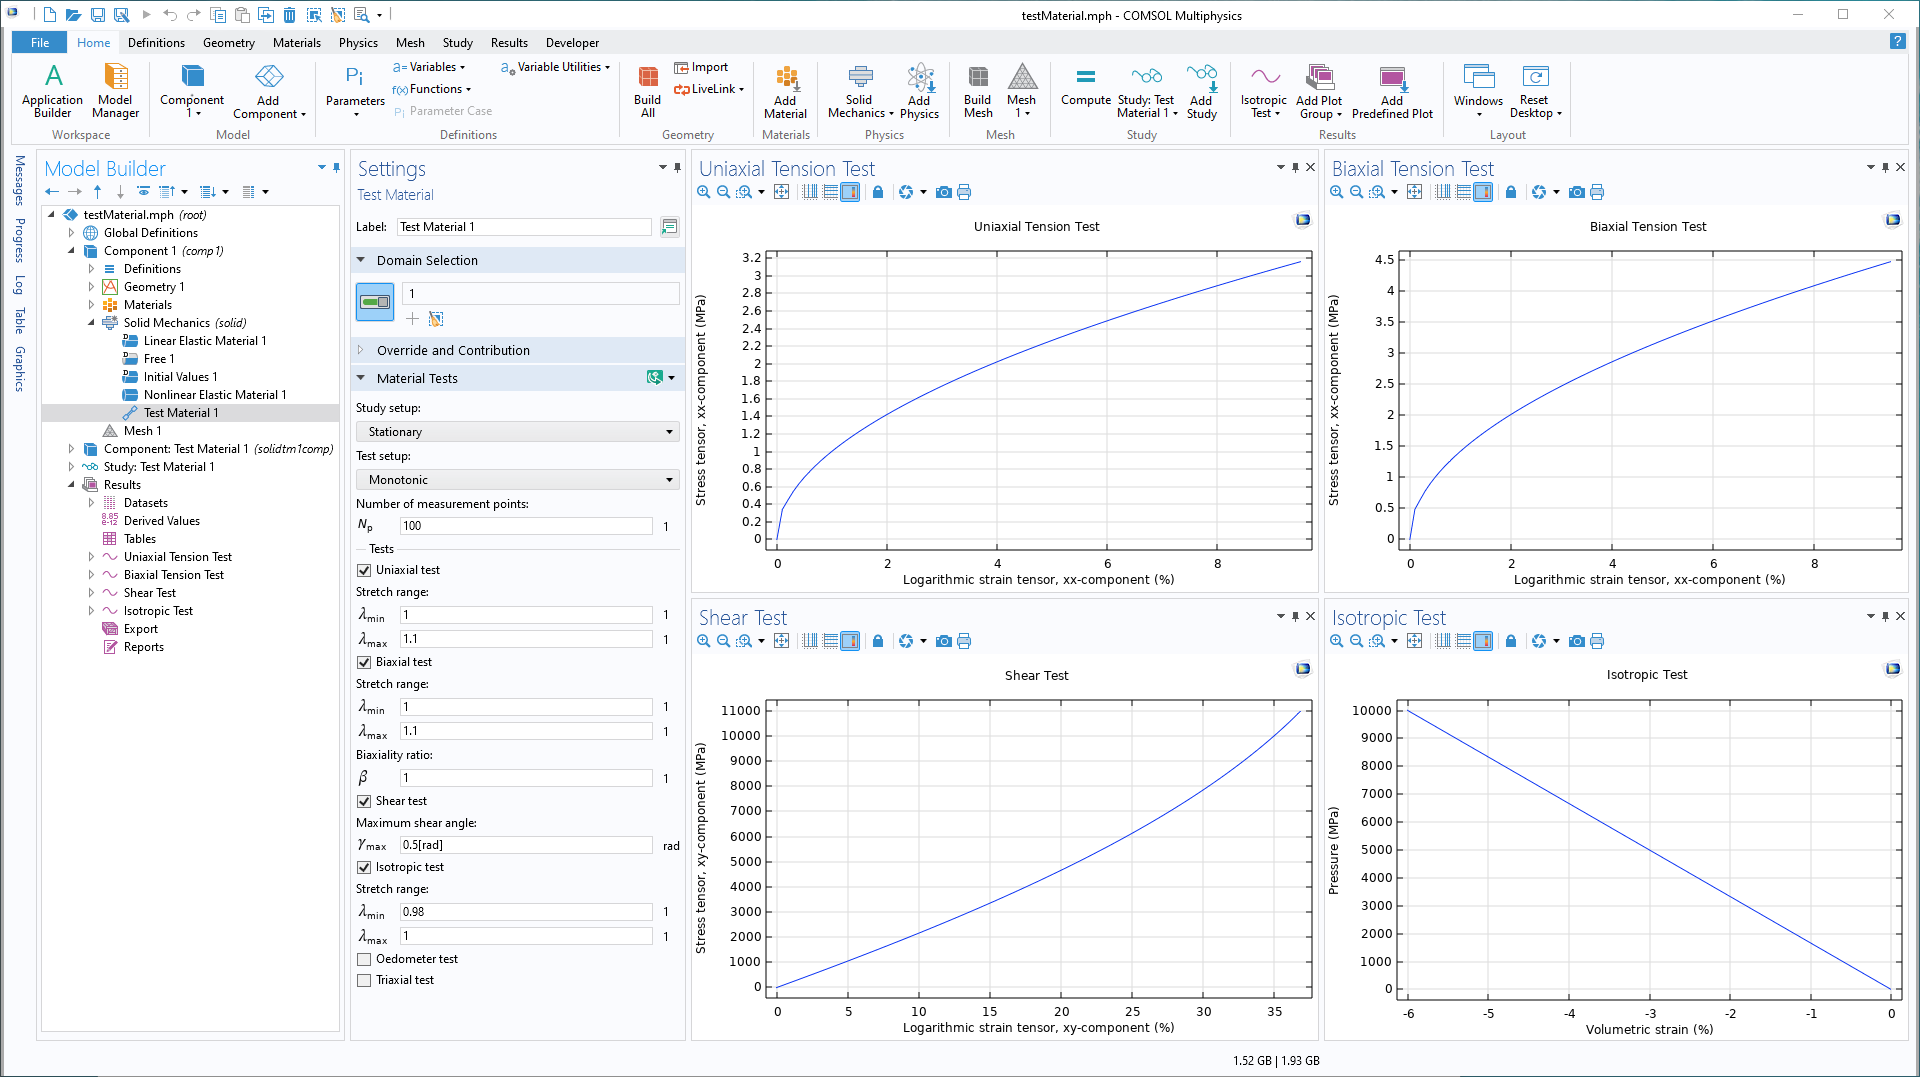 The COMSOL Multiphysics UI showing the Model Builder with the Test Material node highlighted, the corresponding Settings window, and four Graphics windows.